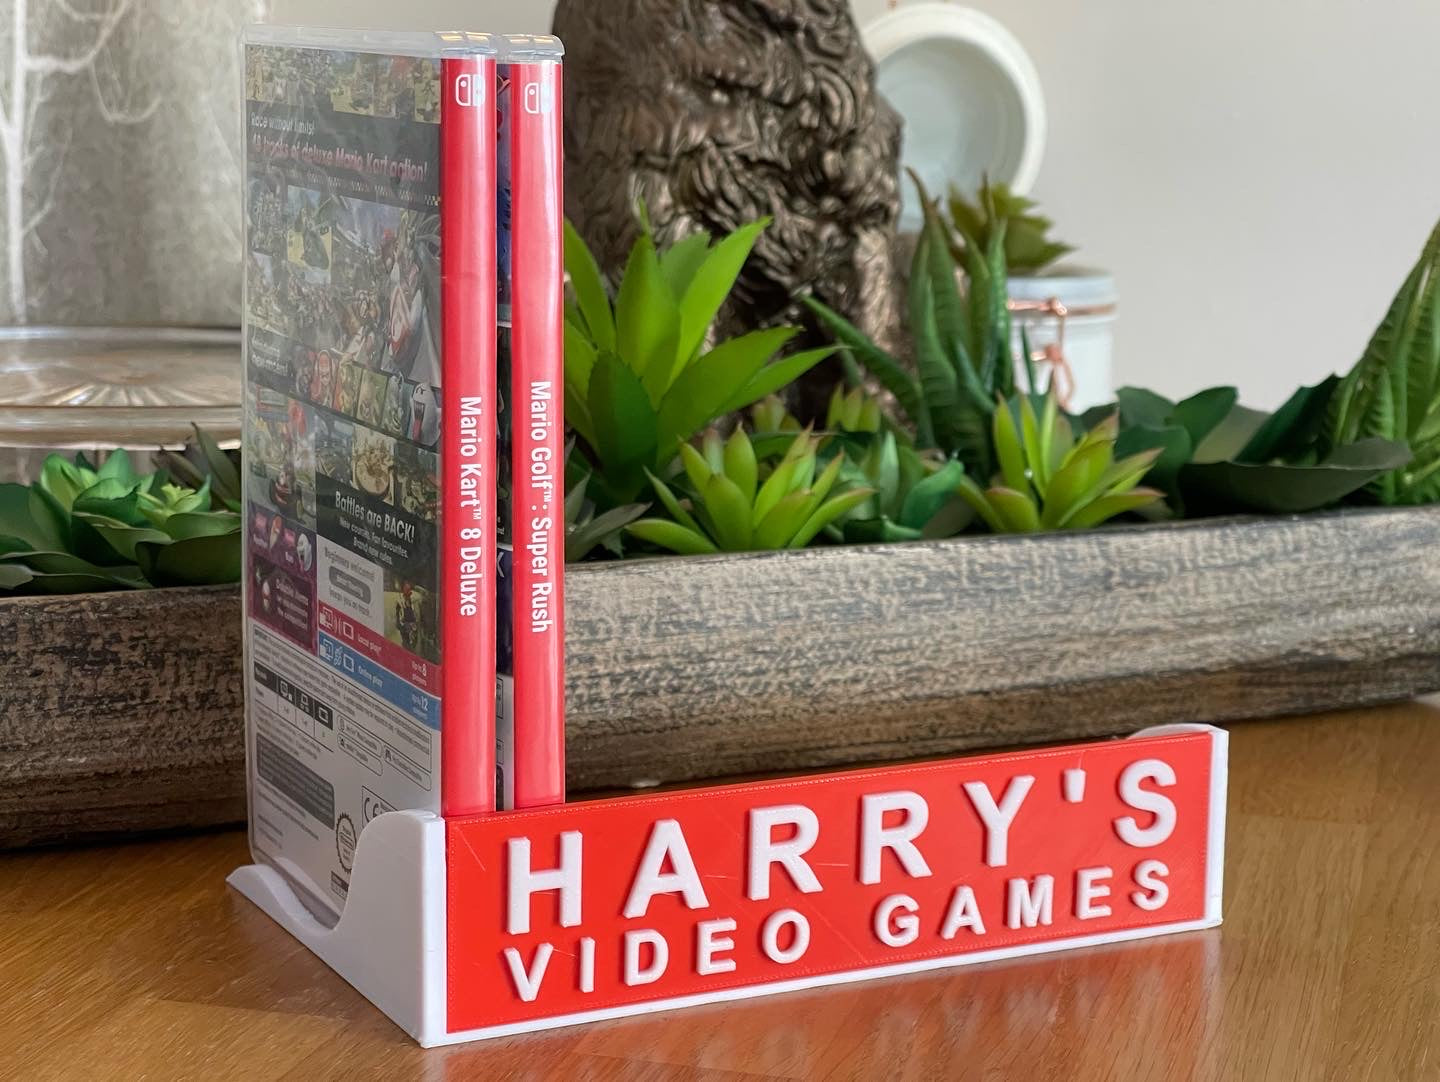 Personalised Nintendo Switch Games Case Holder Stand for Book Shelf - Holds 12 Game Boxes